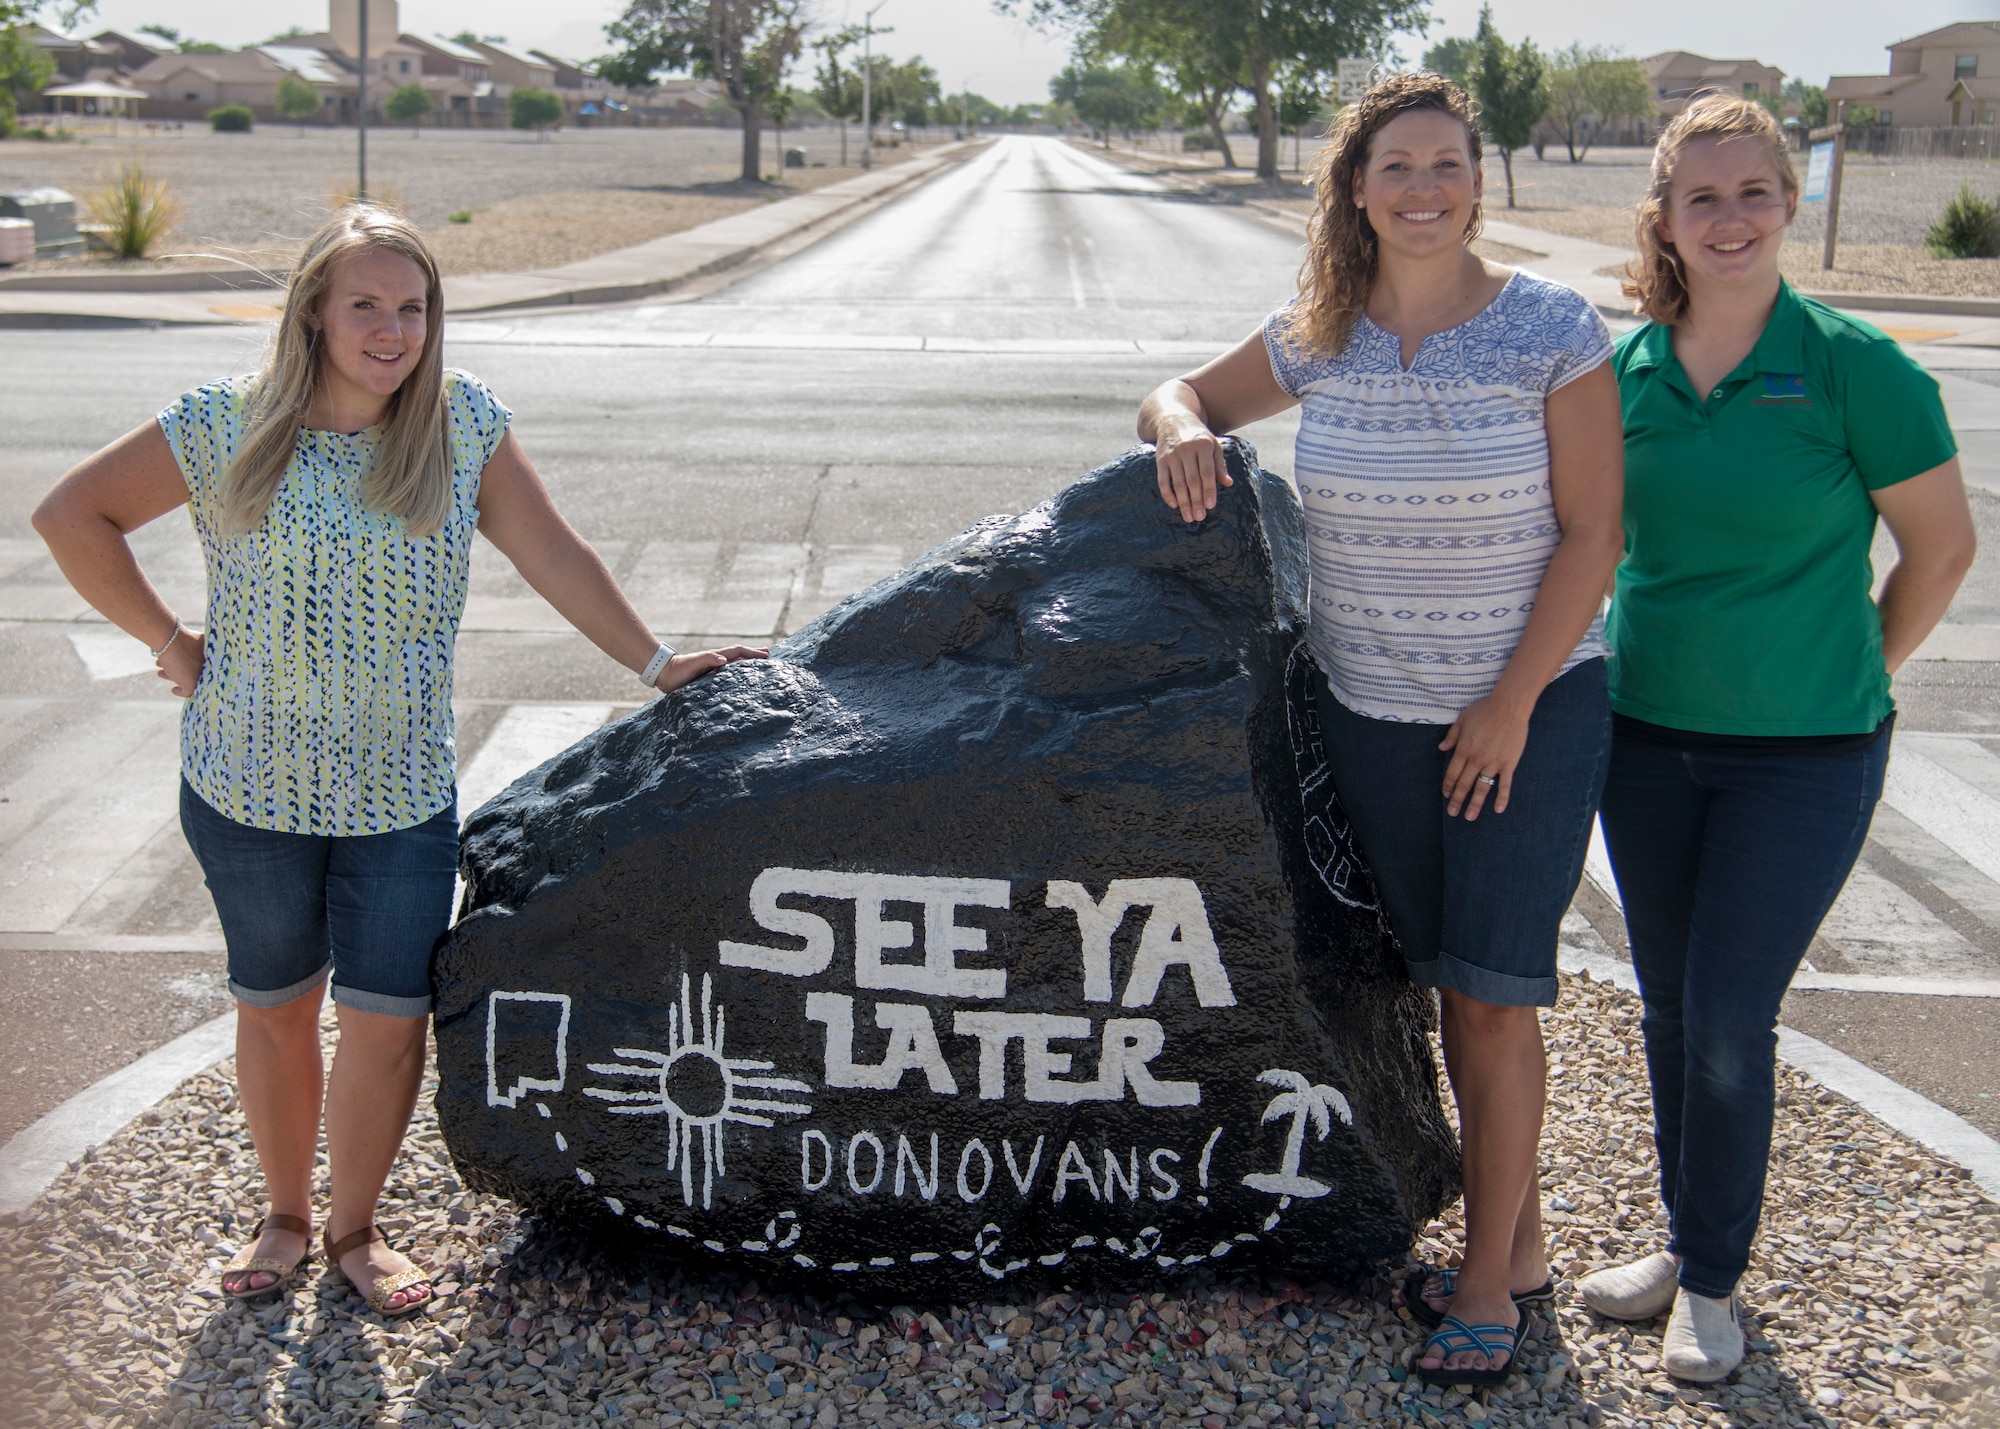 (from left to right) Jackie Ottesen, 6th Attack Squadron key spouse, Maj. Naomi Donovan, 924th Aircraft Maintenance Squadron commander and 2018 49th Mission Support Group key spouse, and Kim Furry, 49th Force Support Squadron community activity center manager, pose for a photo at the “Holloman rock,” June 23, 2020, on Holloman Air Force Base, N.M. Holloman key spouses paint this decorative rock approximately every two weeks to highlight fun events, holidays and general base awareness activities in order to promote community, cohesion and aid in putting a smile on Team Holloman members’ faces. (U.S. Air Force photo by Senior Airman Collette Brooks)